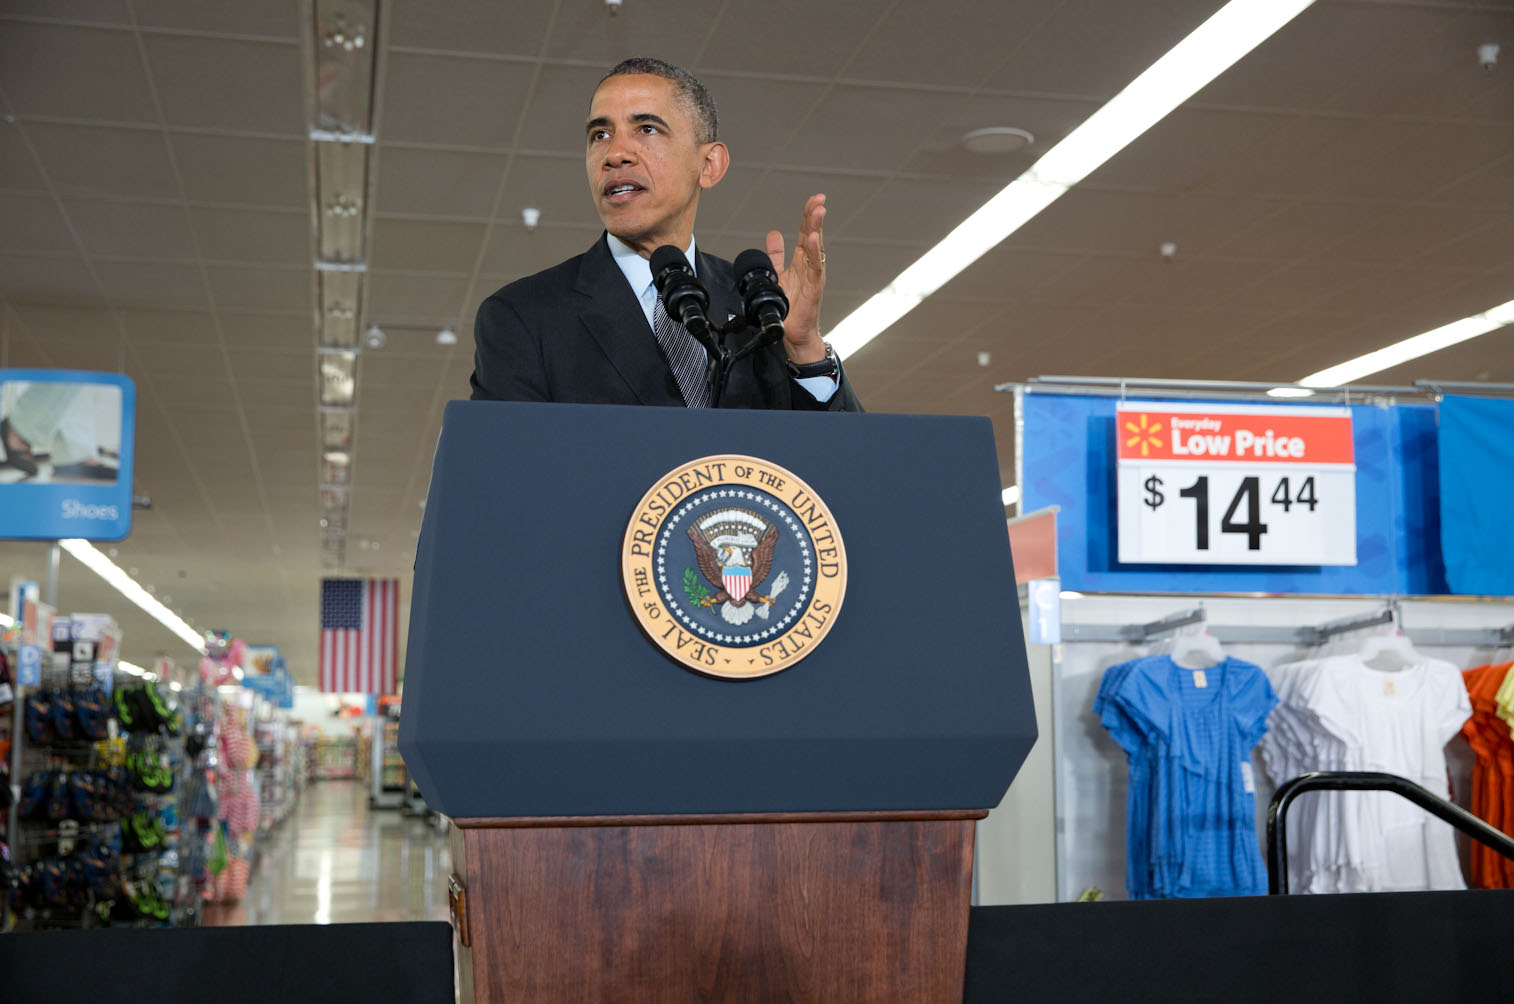 President Barack Obama delivers remarks on energy efficiency, at the Walmart in Mountain View, California